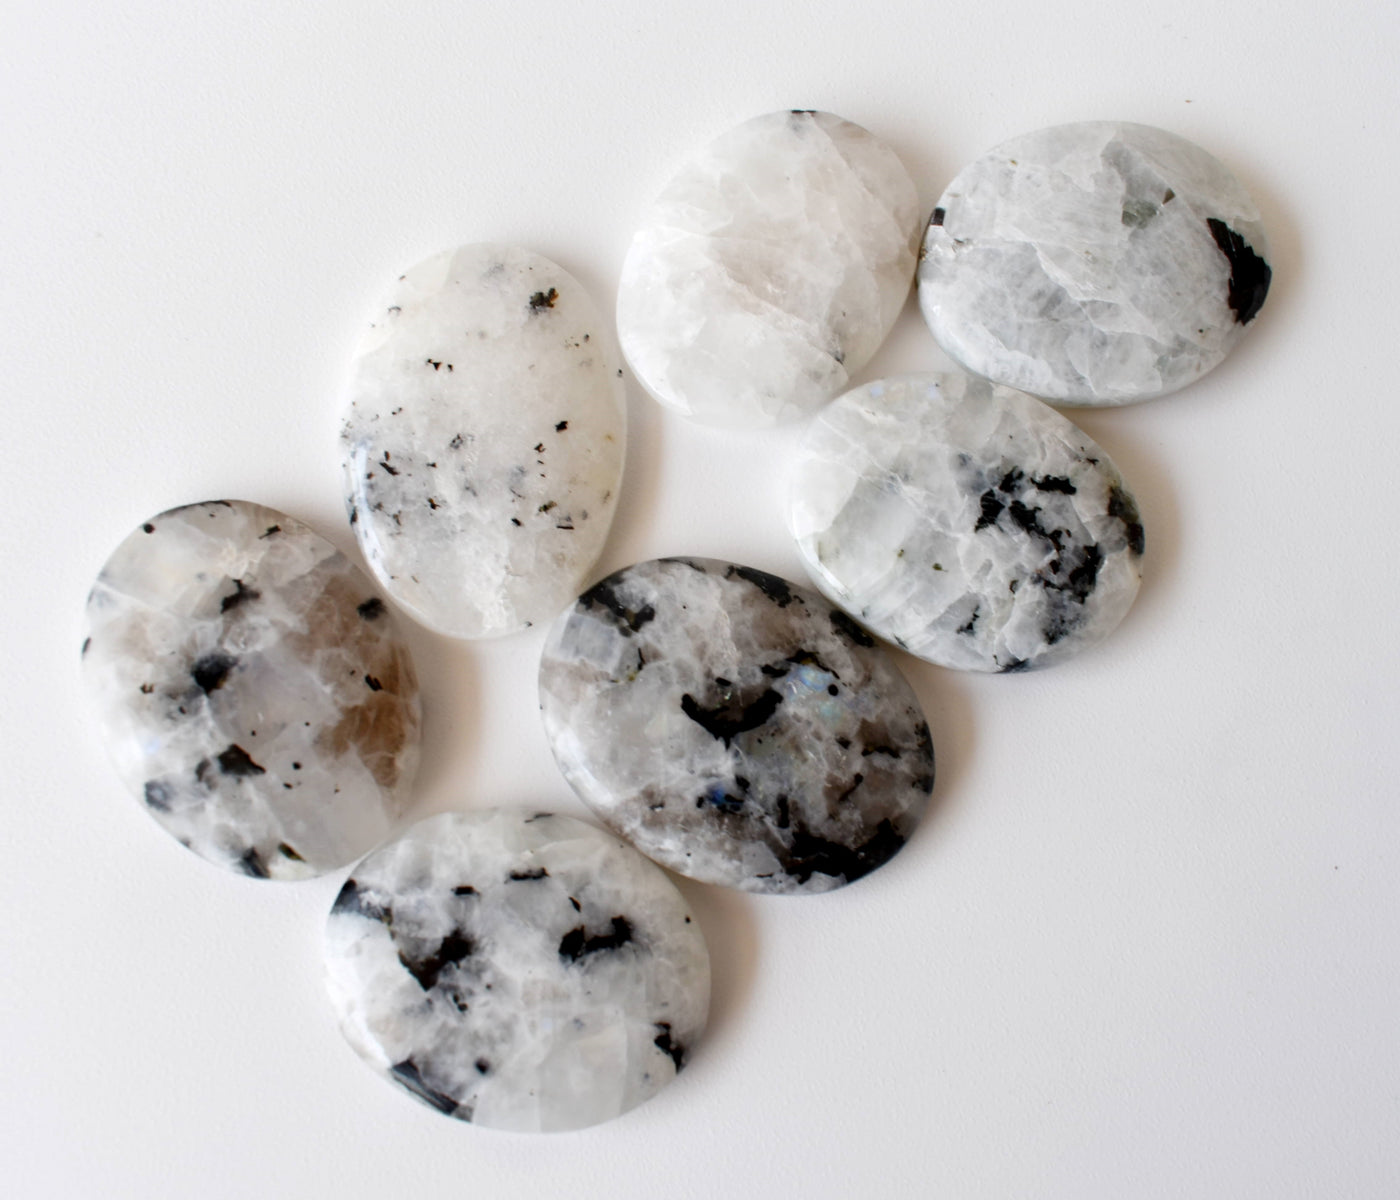 Rainbow Moonstone Pocket Stones (Compassion and Psychic Abilities)